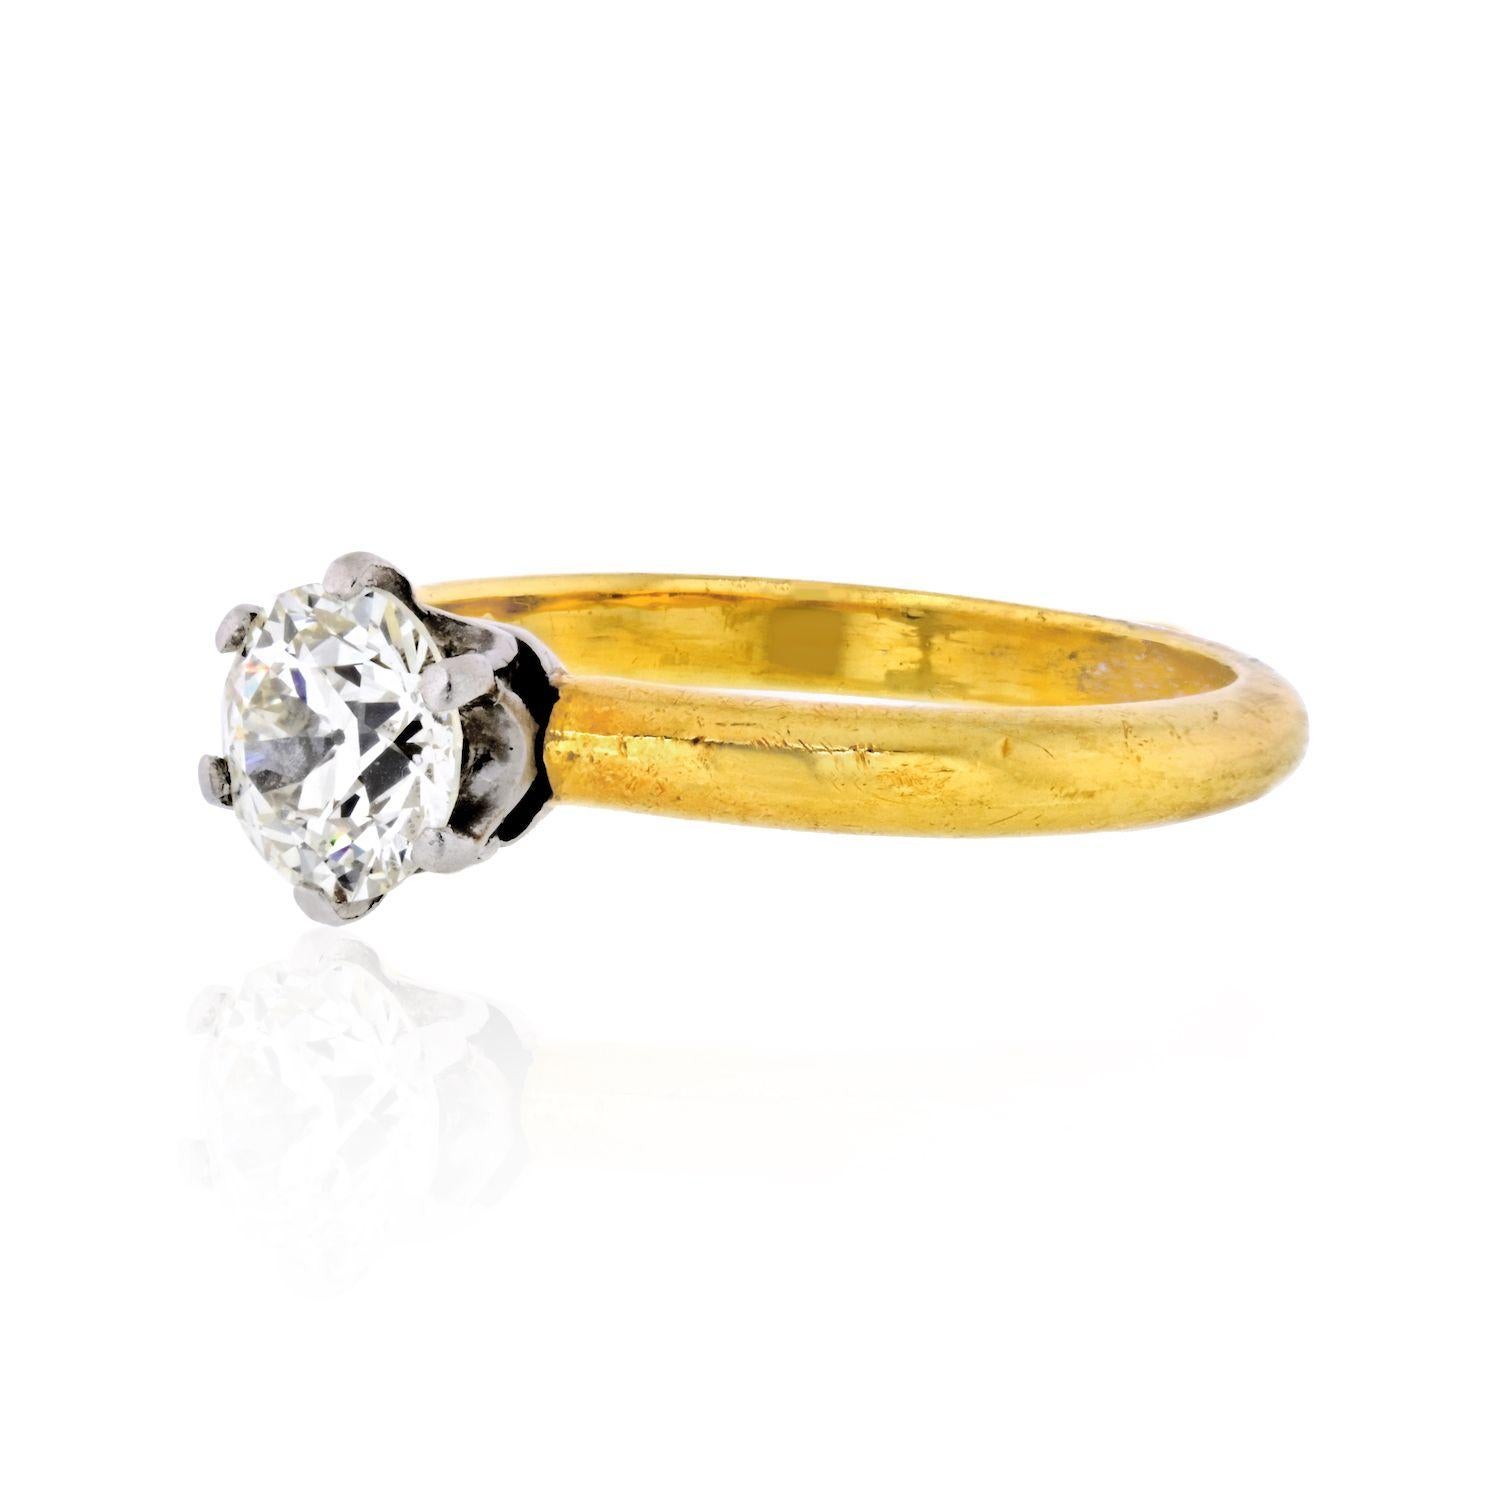 As unique as it is classic, this 18K yellow gold, Old European Cut diamond engagement ring is mounted with one antique Old European Cut diamond (1.00). It is elegantly set on a smooth round band. Size 6. 
Center diamond is of K color and VS1 clarity